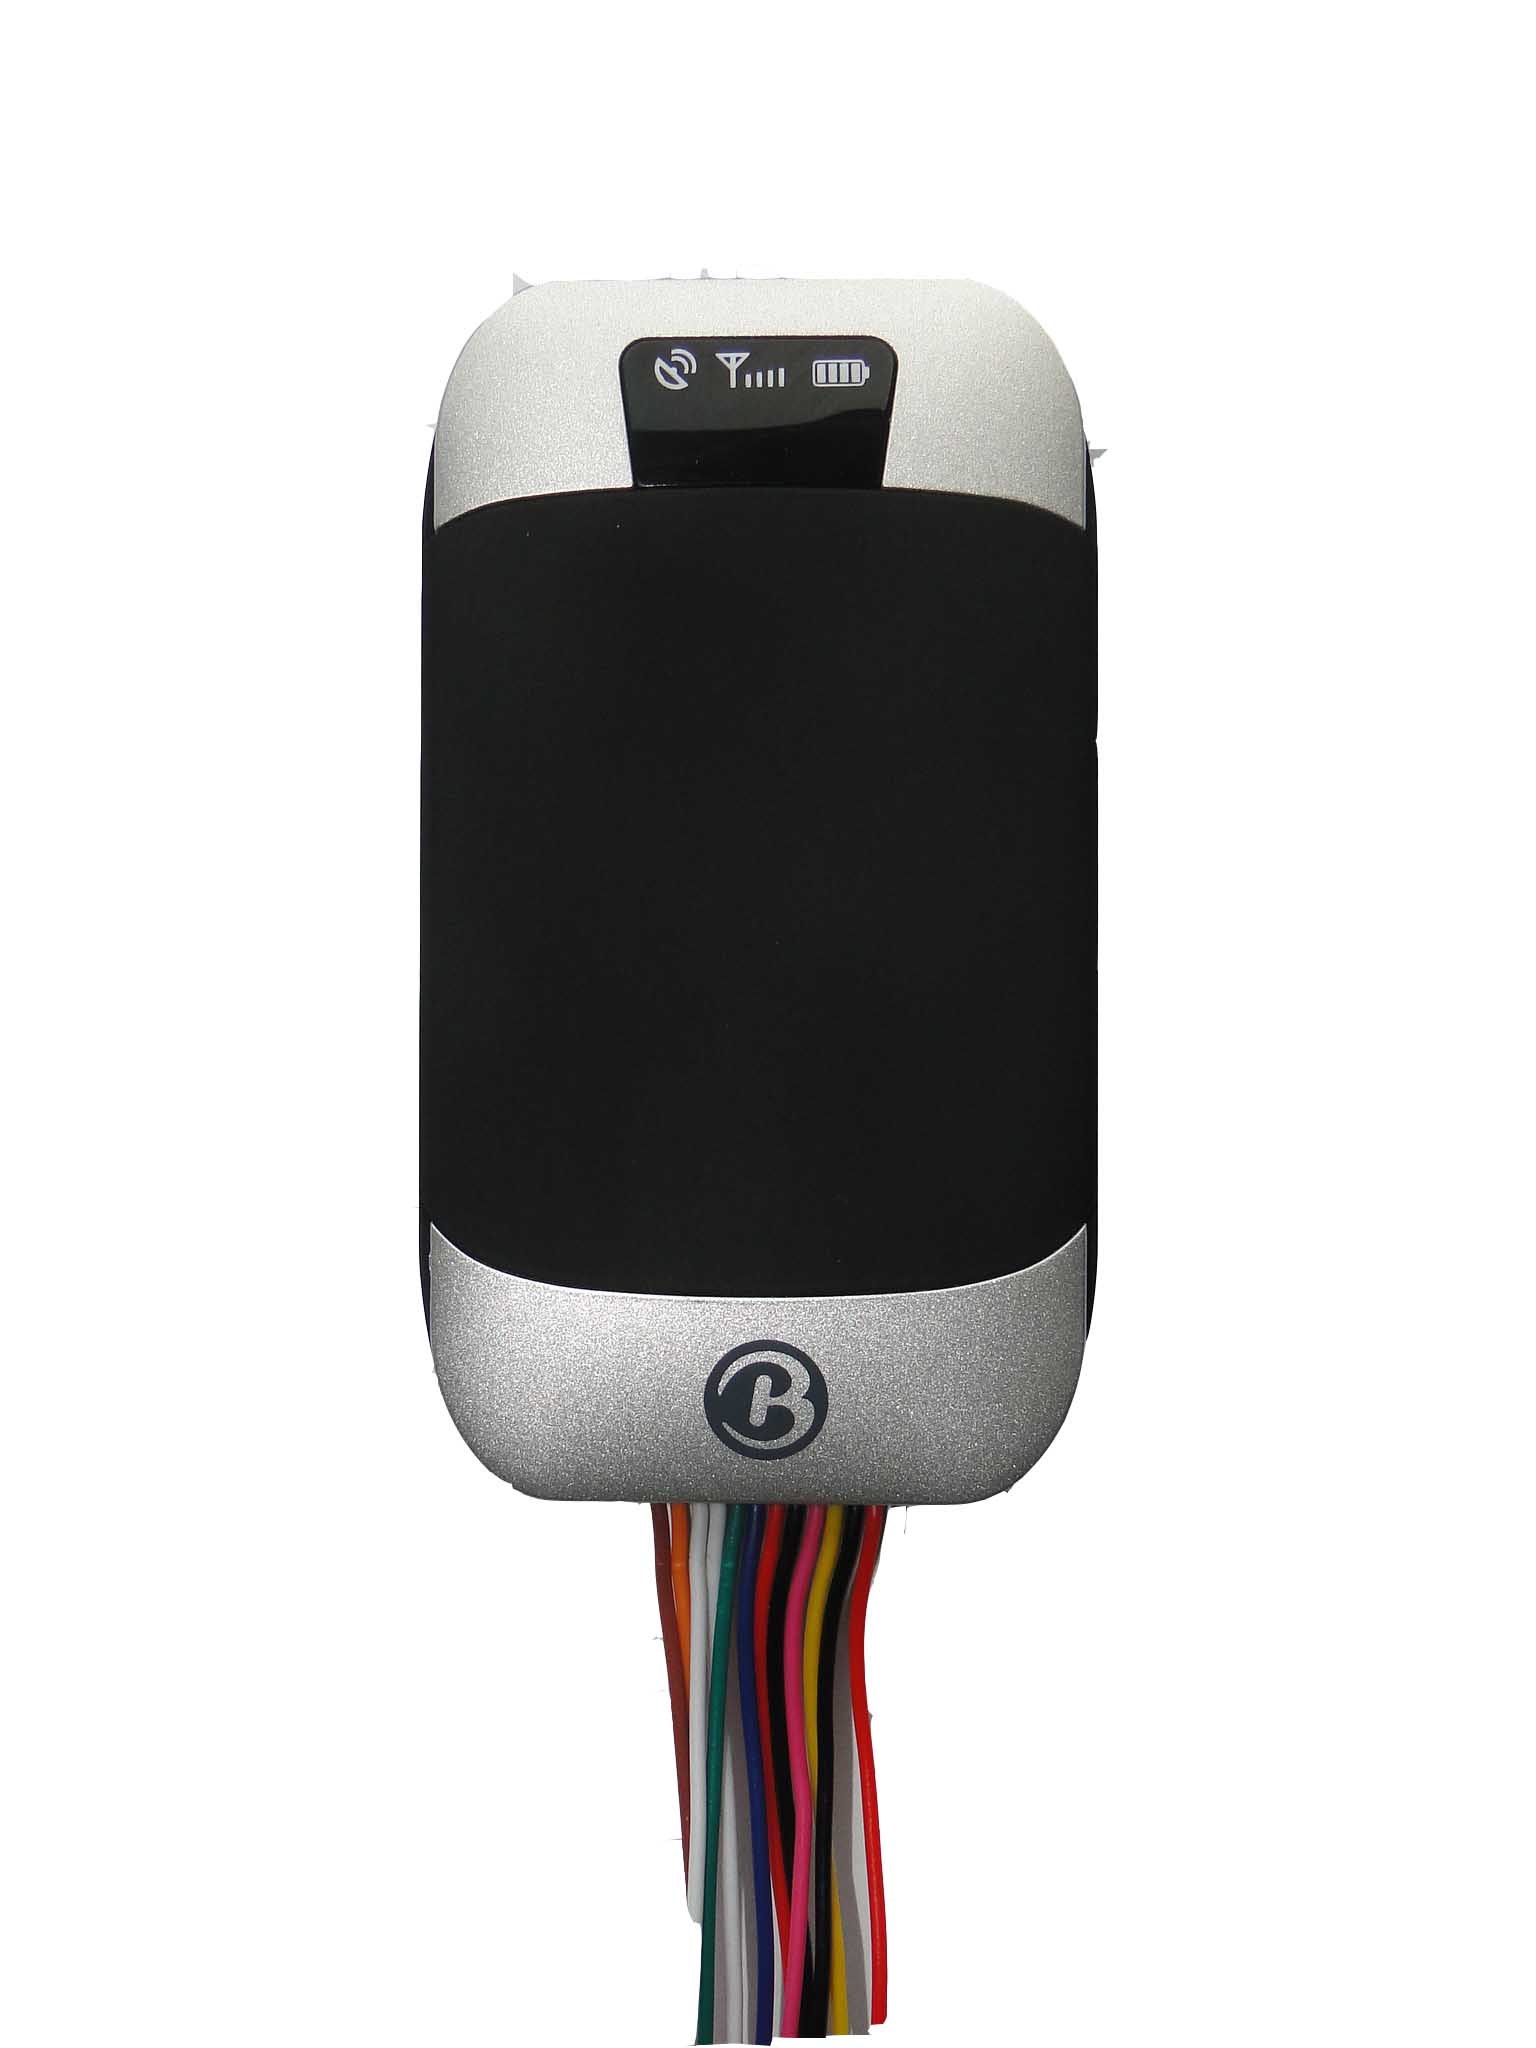 GPS 303b China Cheap GPS Tracker Software for Car, Motorcycle Coban Manufacturer